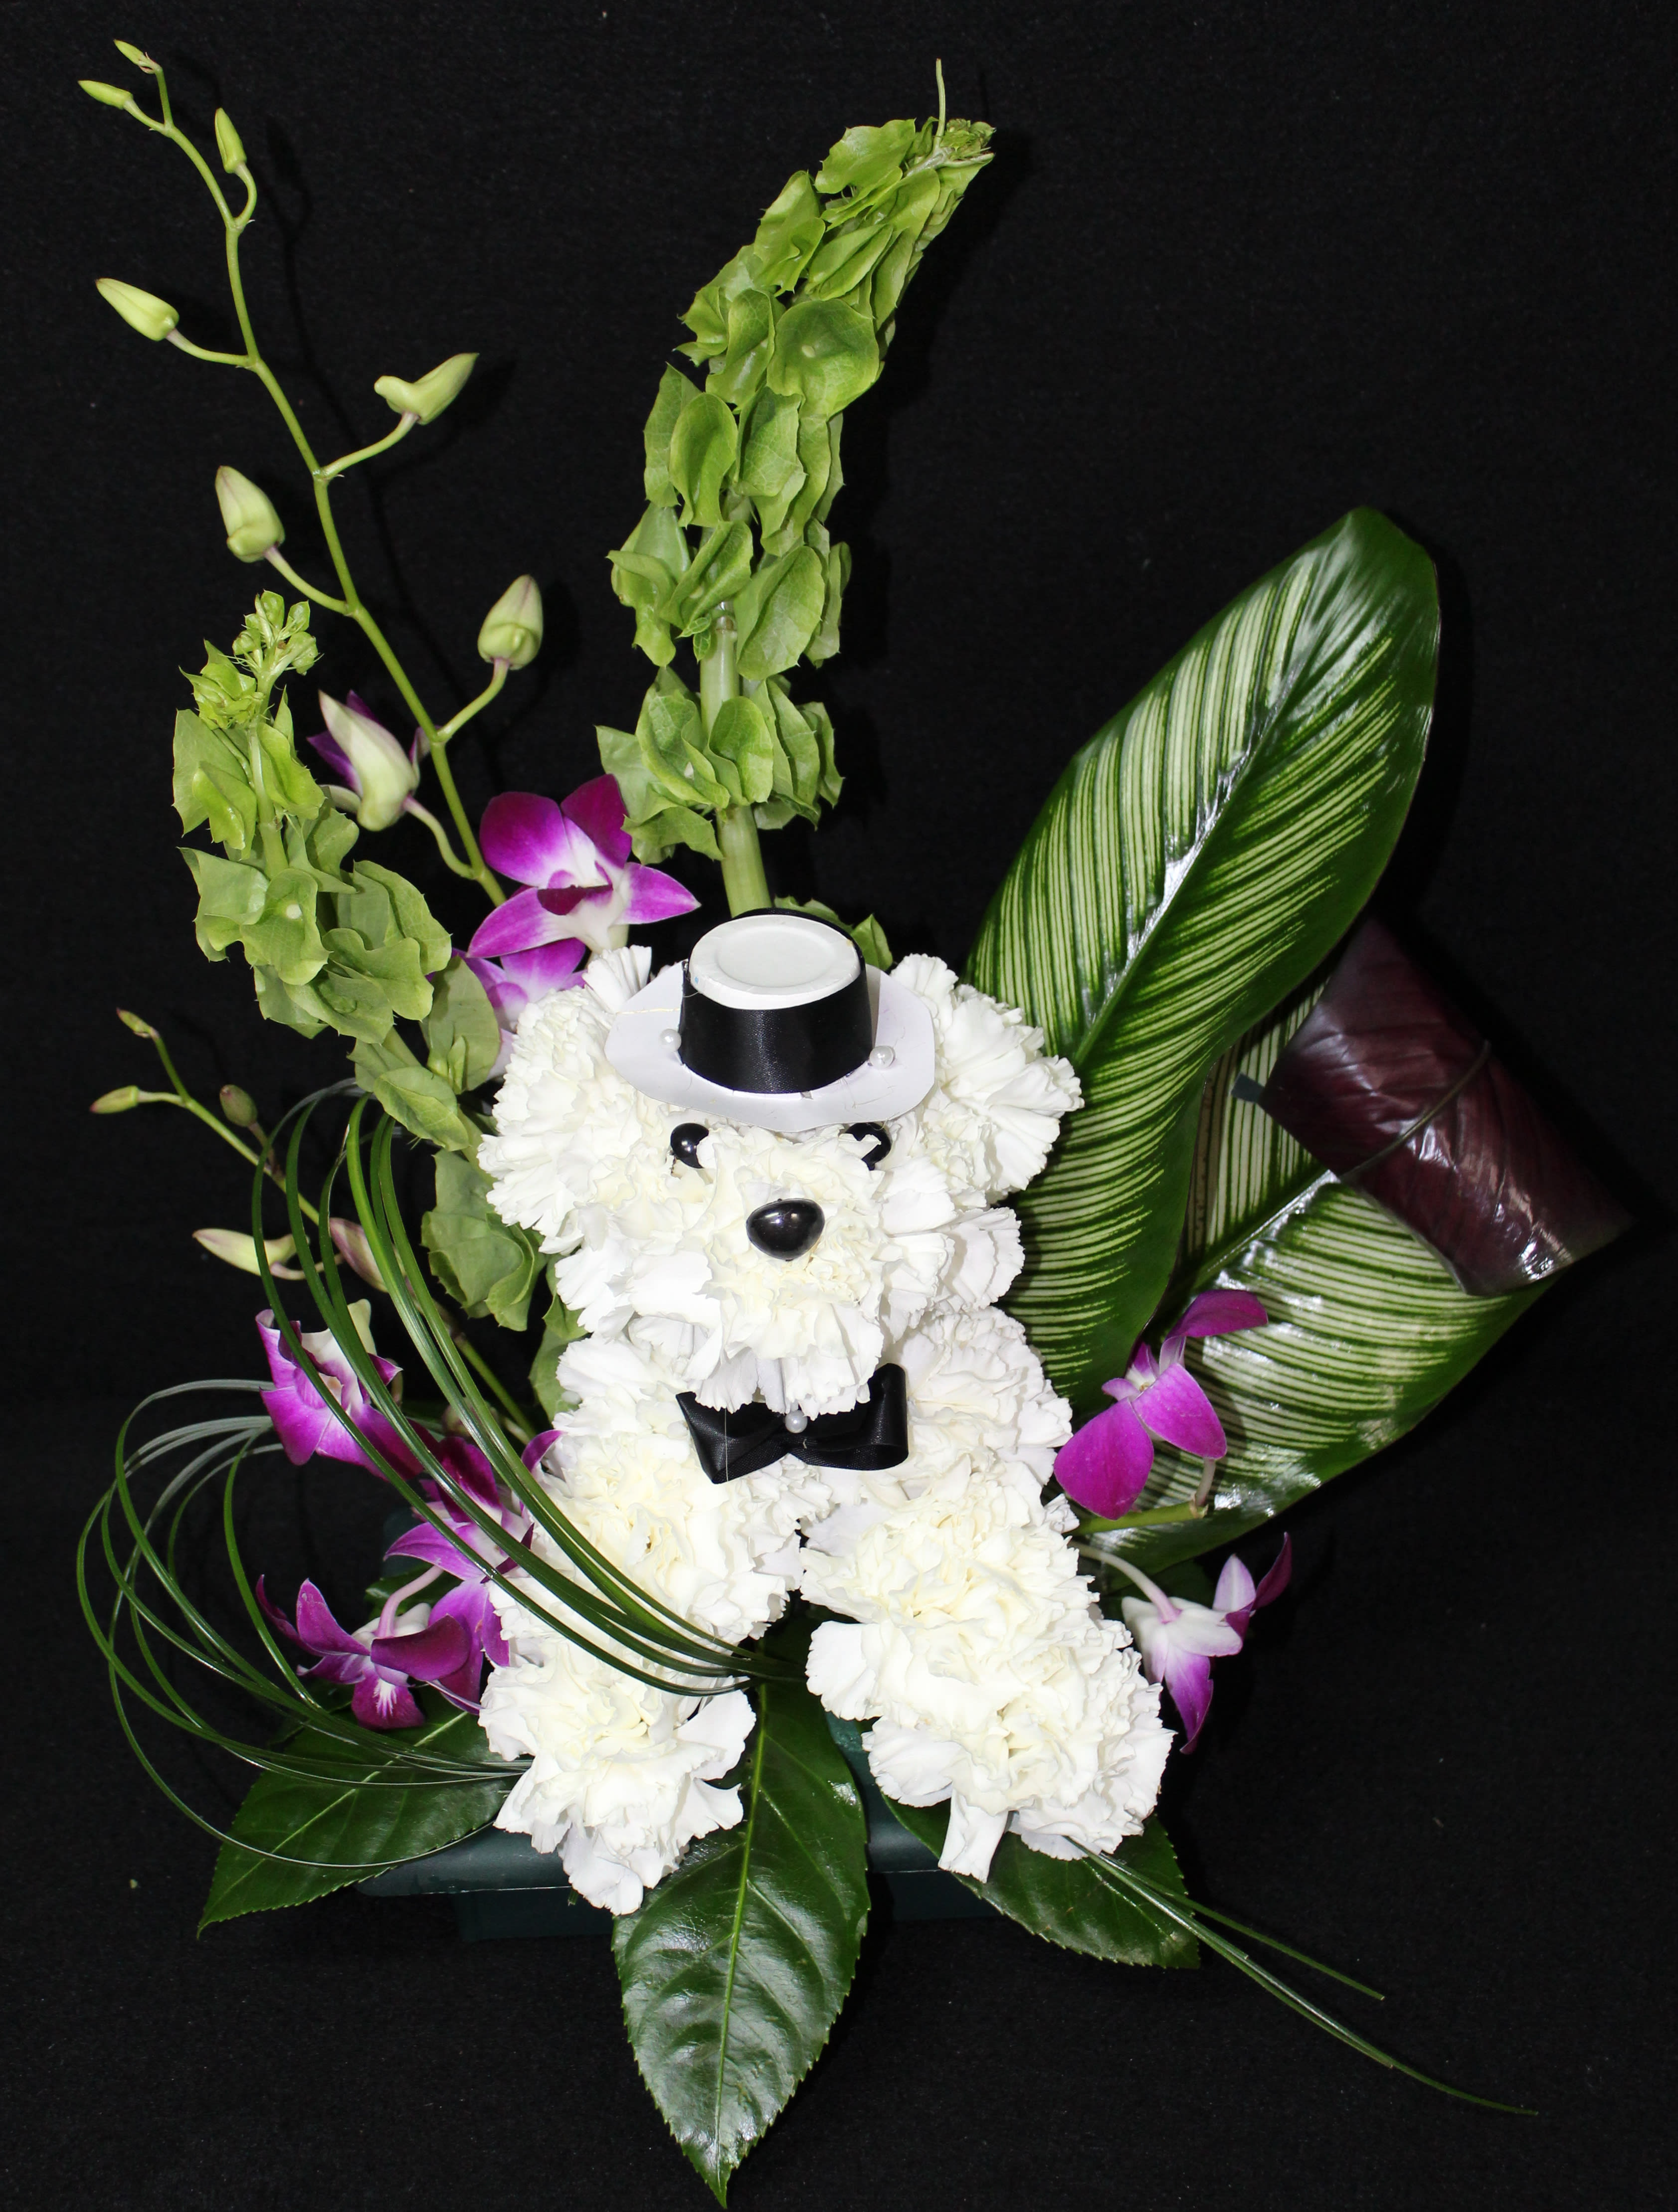 Dapper Dog - An adorable dog shaped from carnations will certainly put a smile on anybody's face